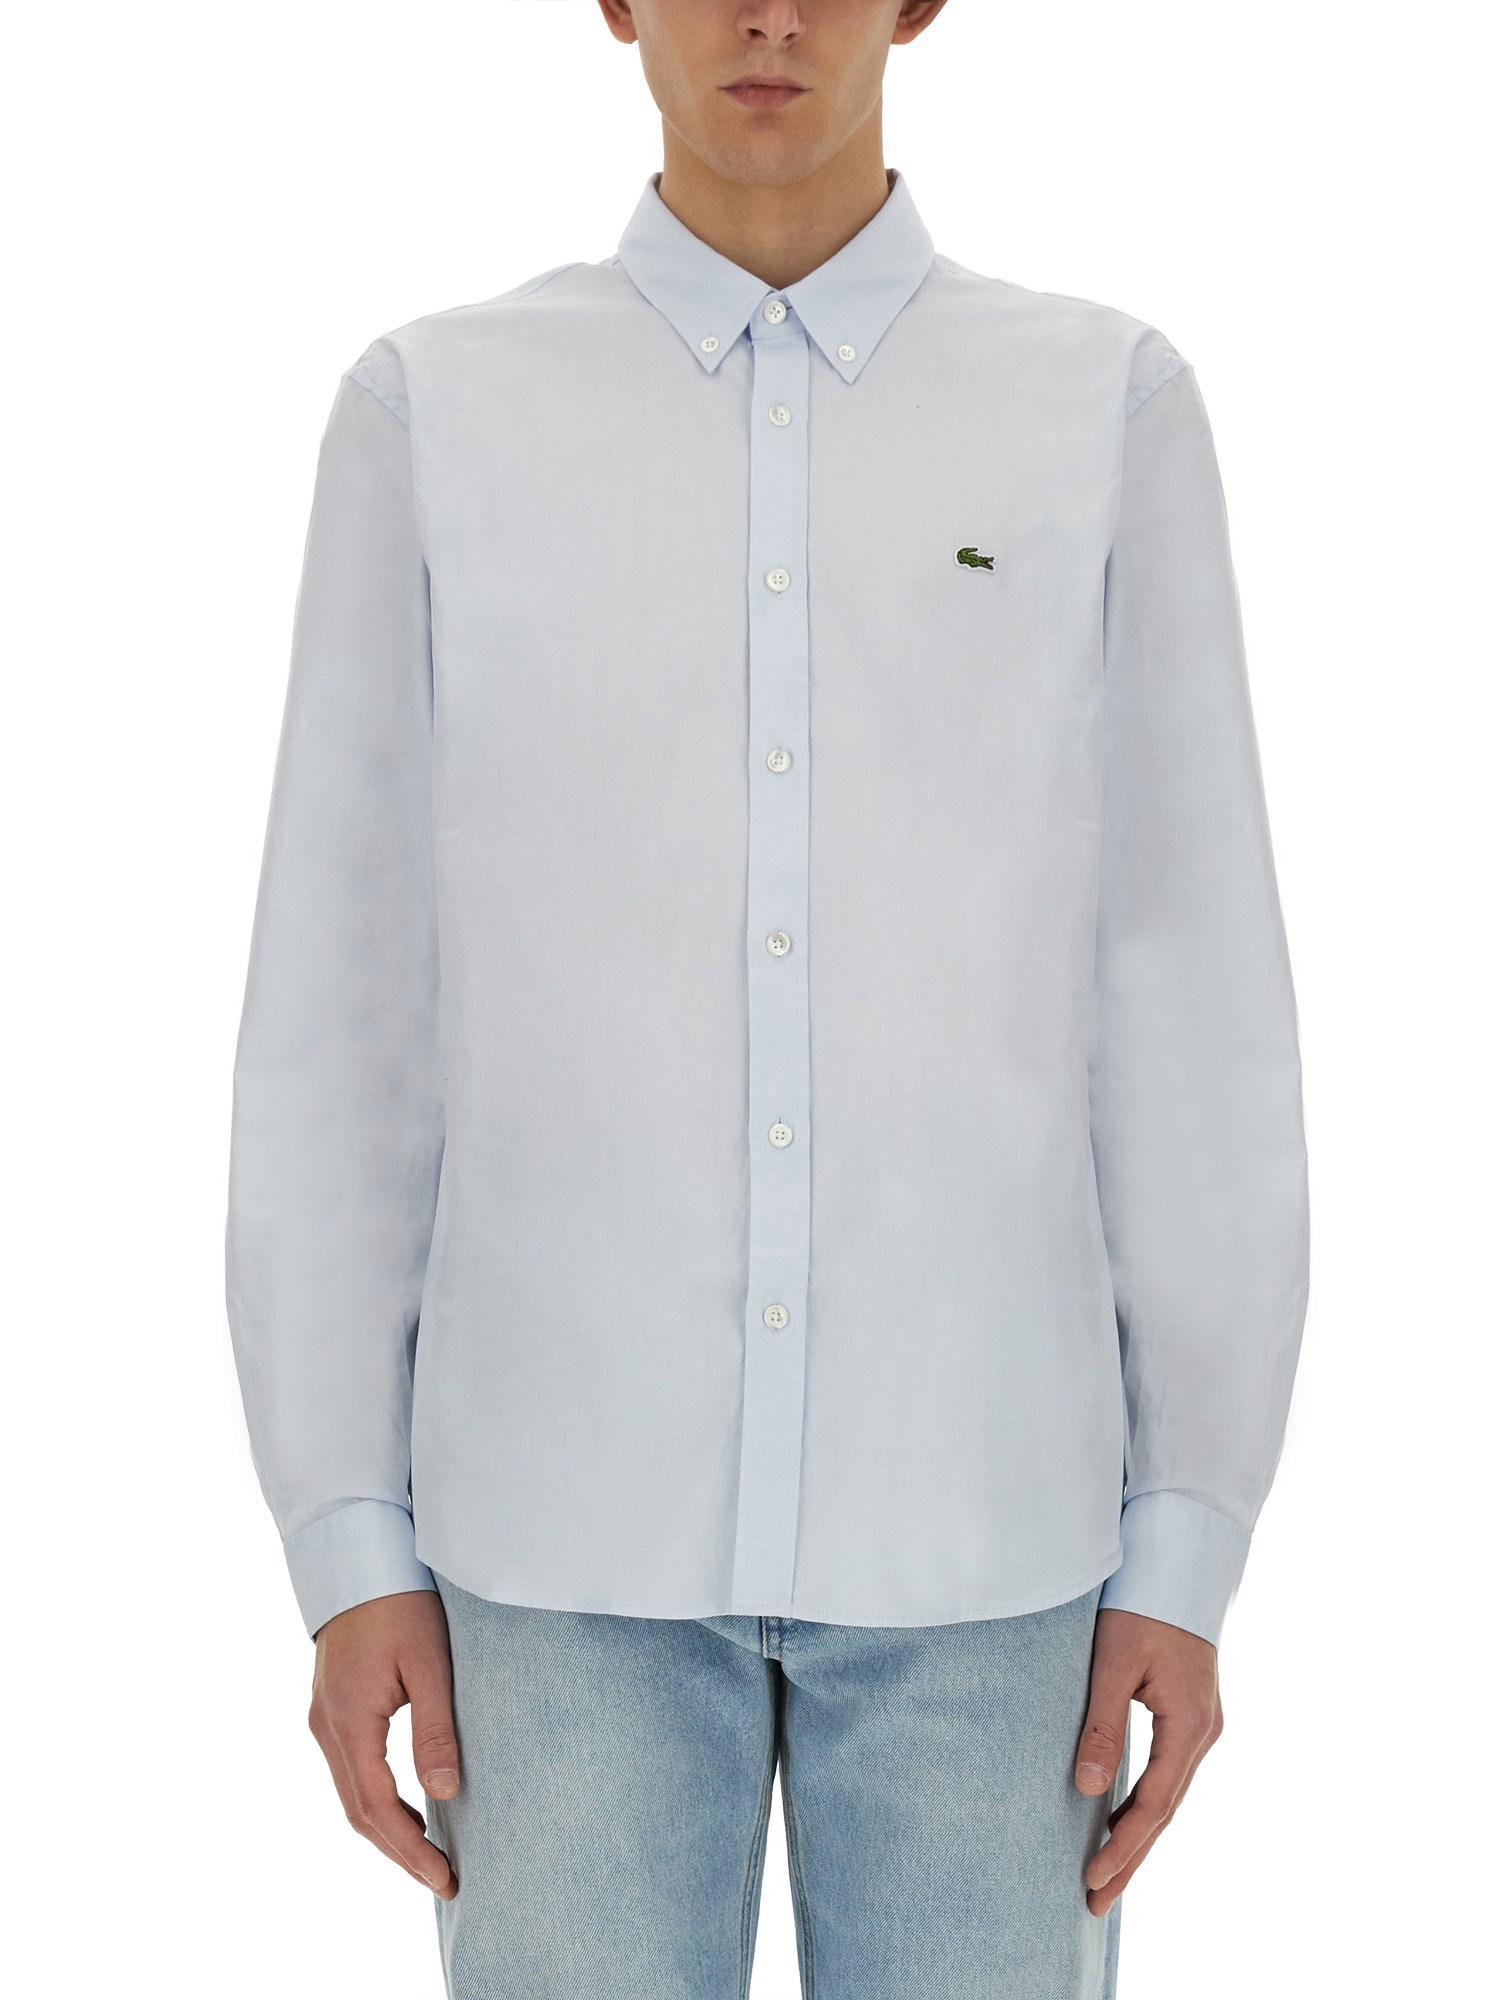 Lacoste lacoste shirt with logo